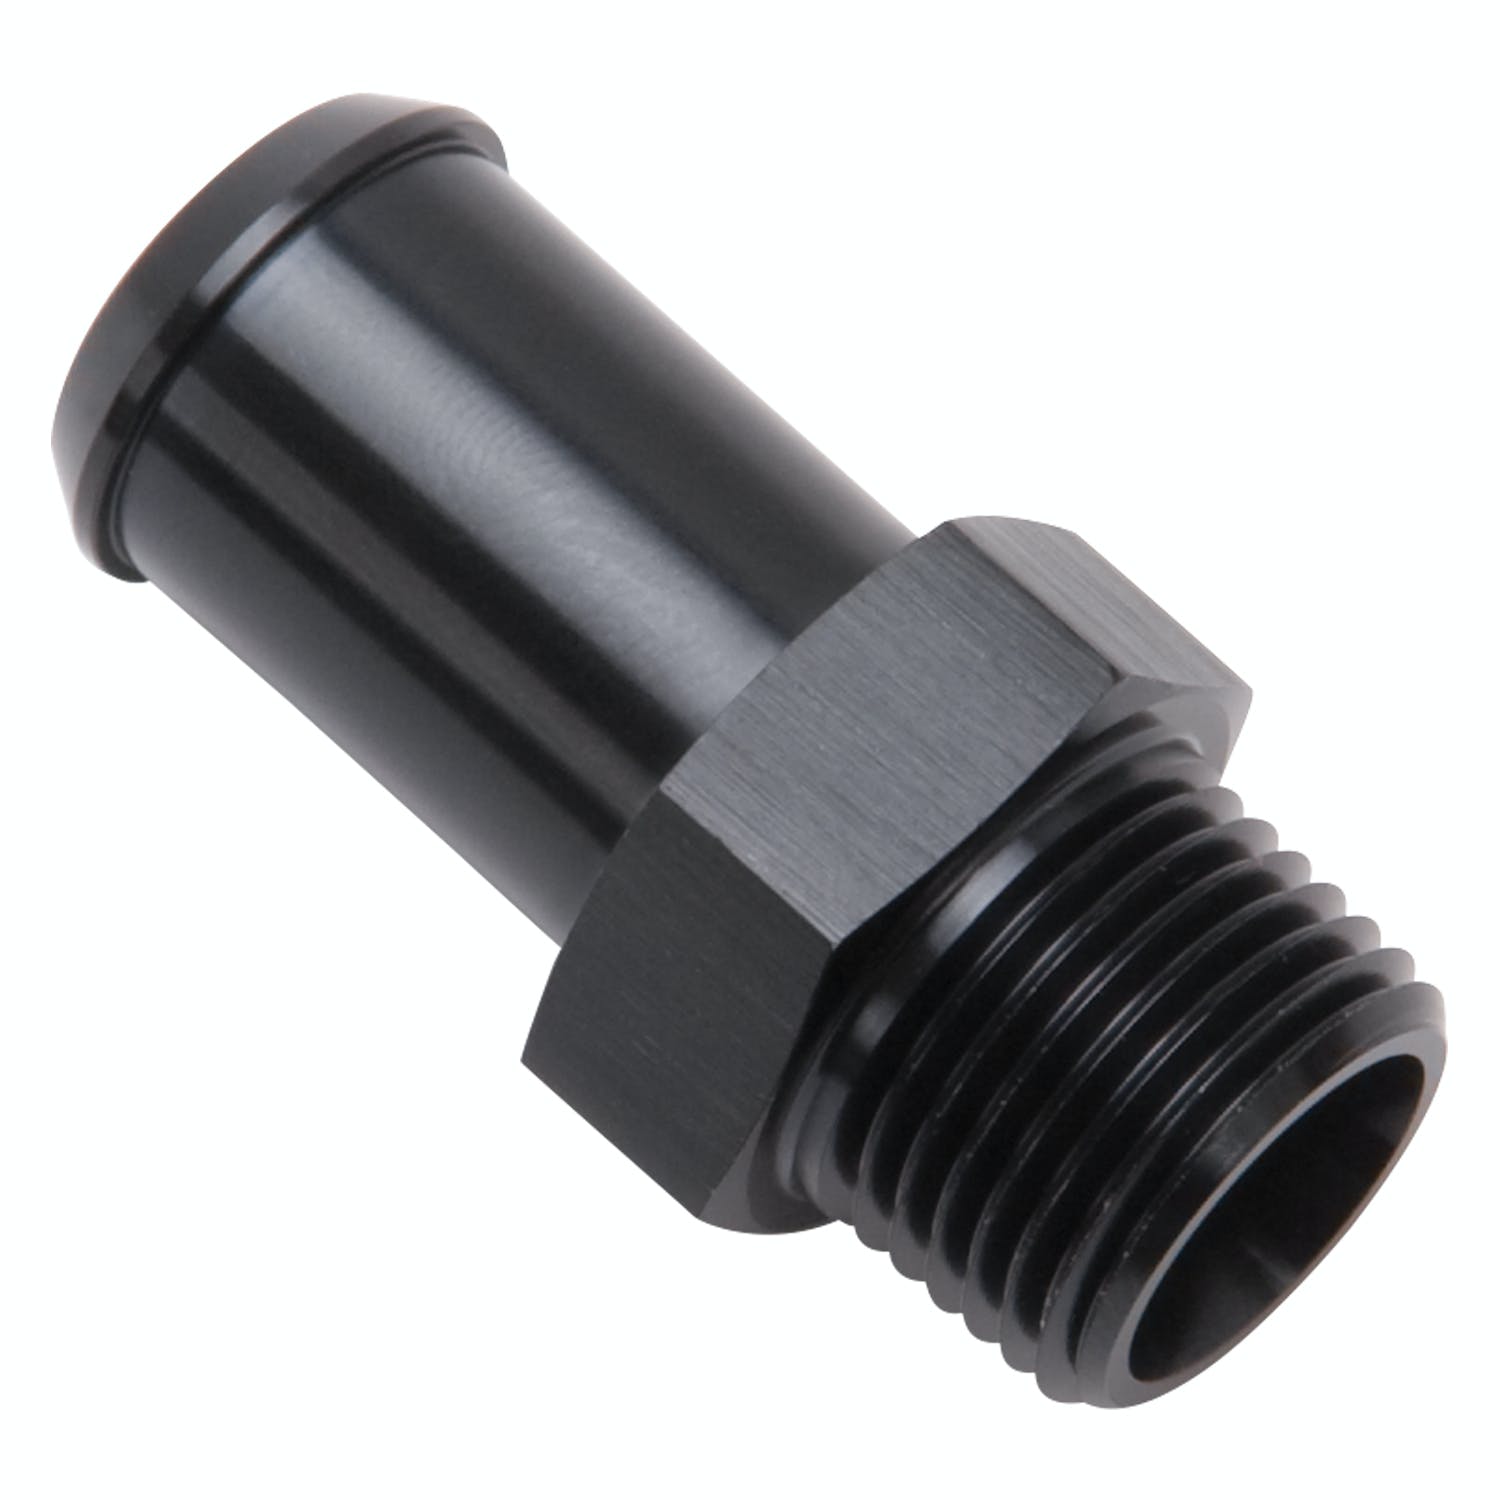 Edelbrock 8187 Heater Hose End Fitting - Straight with 3/8 NPT and 5/8 Barb.